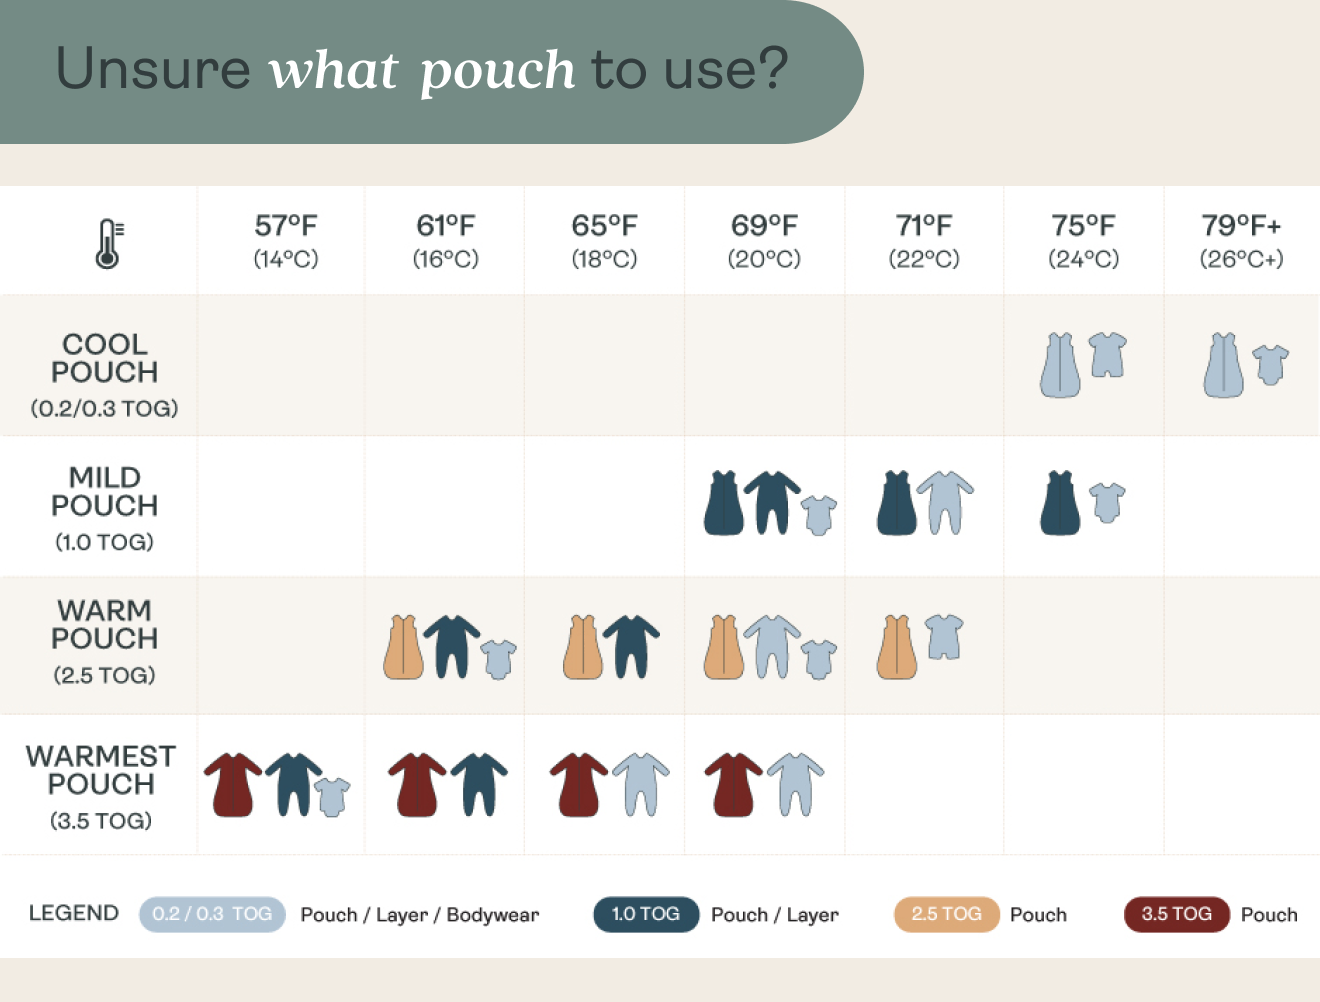 Unsure what pouch to use?ergoPouch TOG rating chart for baby sleepwear